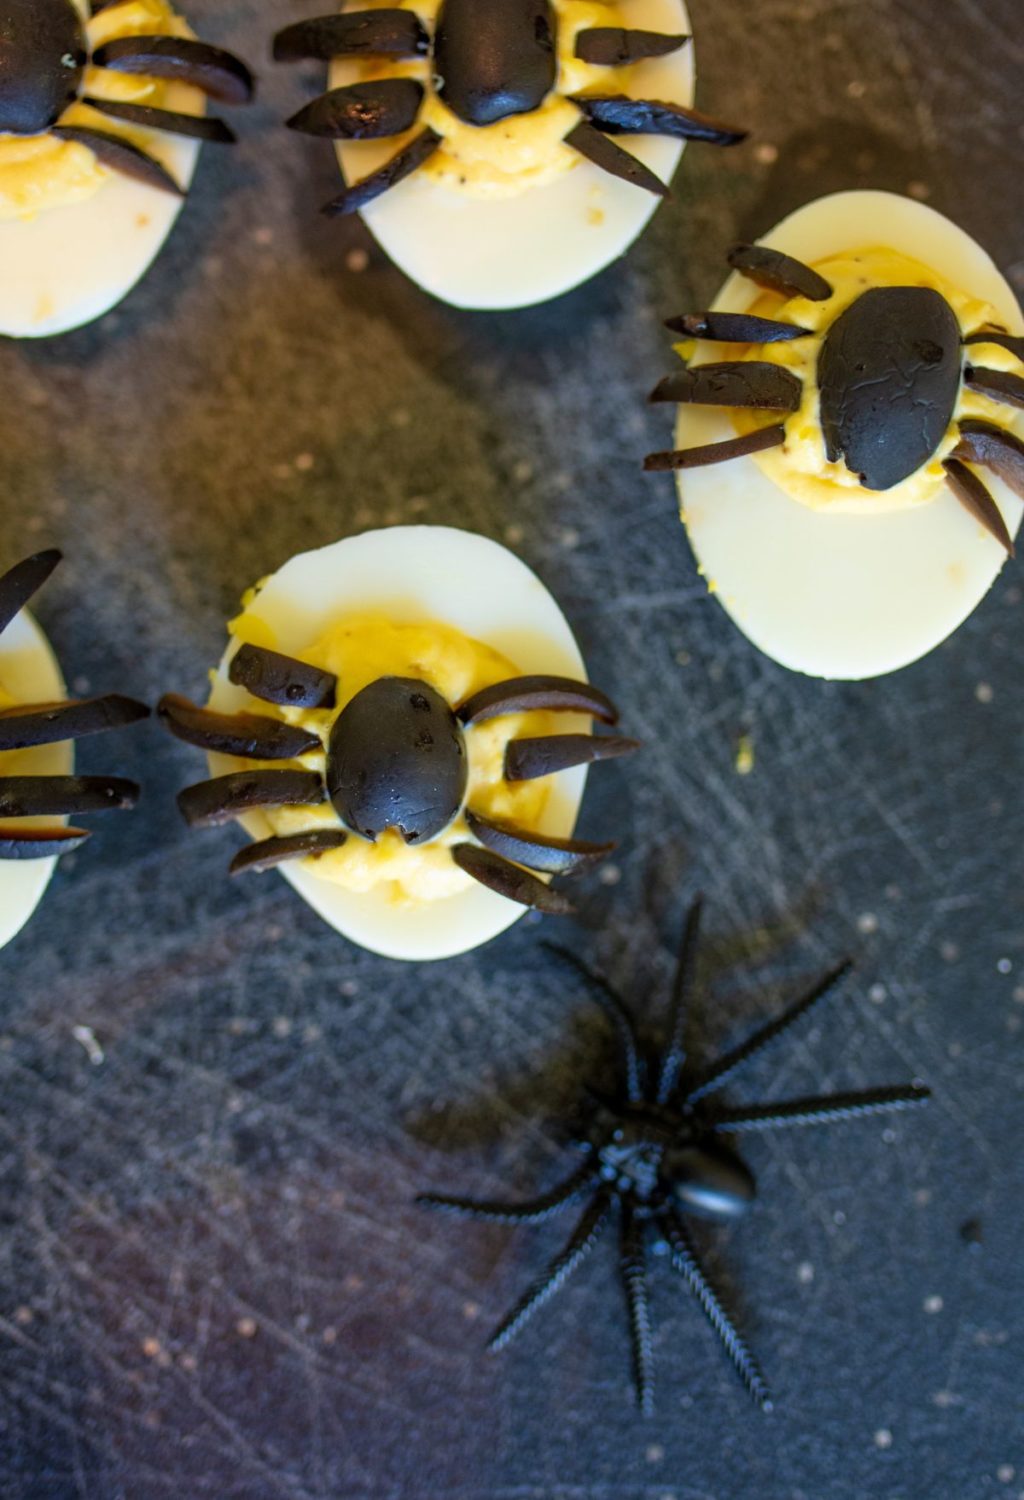 Spooky Halloween eggs with spider decorations.